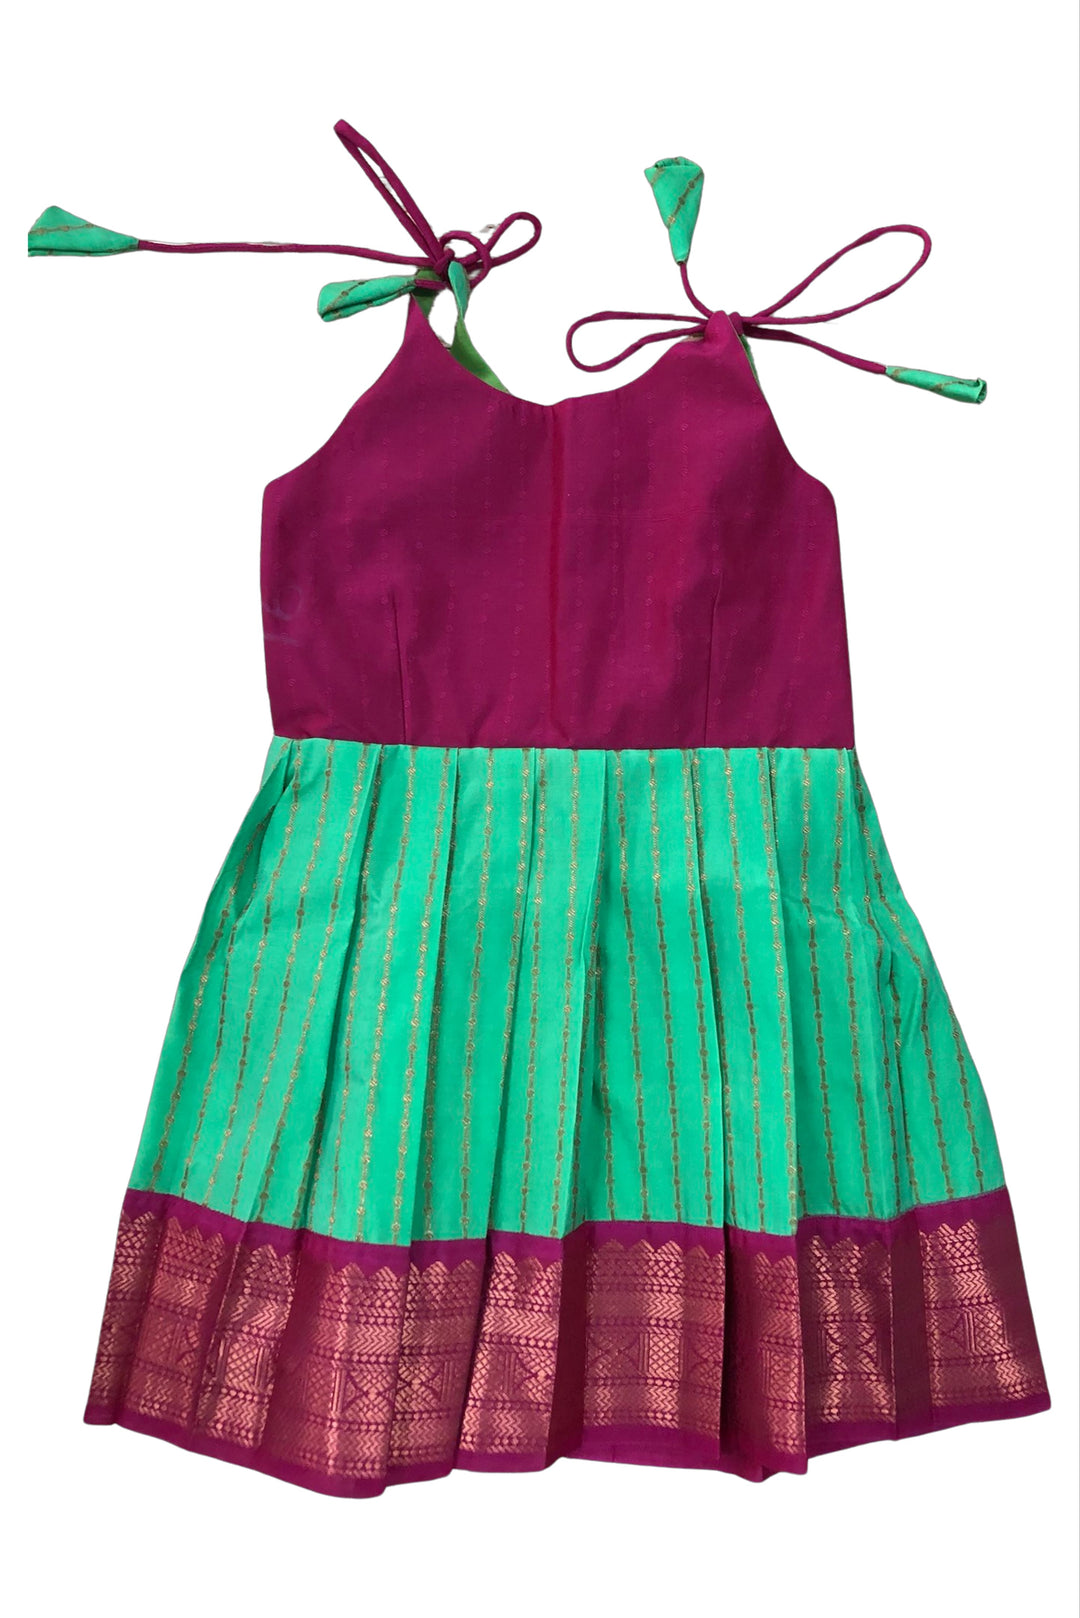 The Nesavu Tie-up Frock Magenta and Green Silk Tie-Up Frock - Traditional Party Dress Nesavu 16 (1Y) / Green / Style 4 T297D-16 Silk Party Dress in Magenta & Emerald | Ethnic Print Tie-Up Frock | The Nesavu